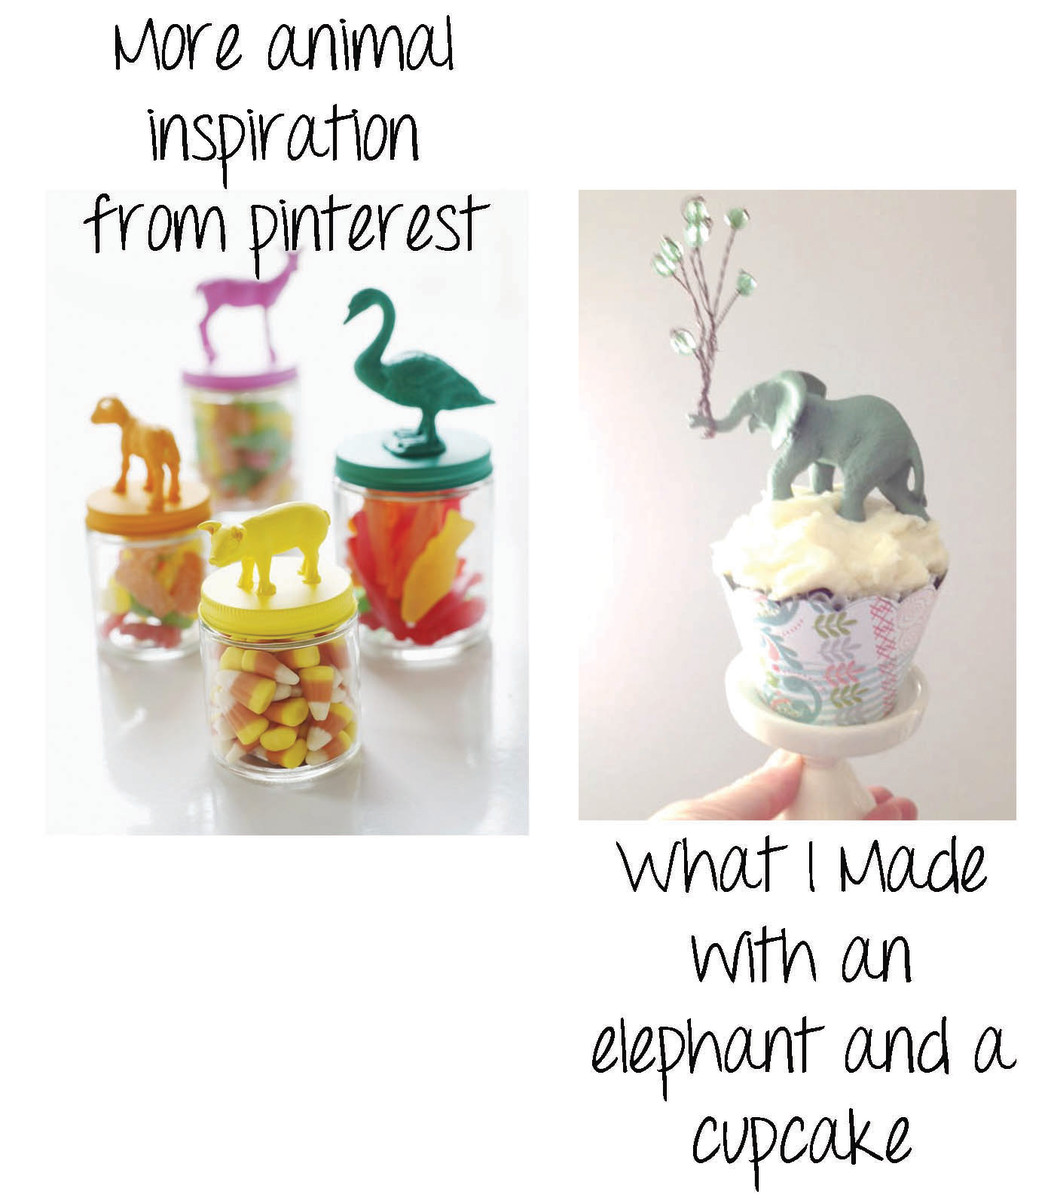 The colorful animals glued to the jars are from Pinterest.